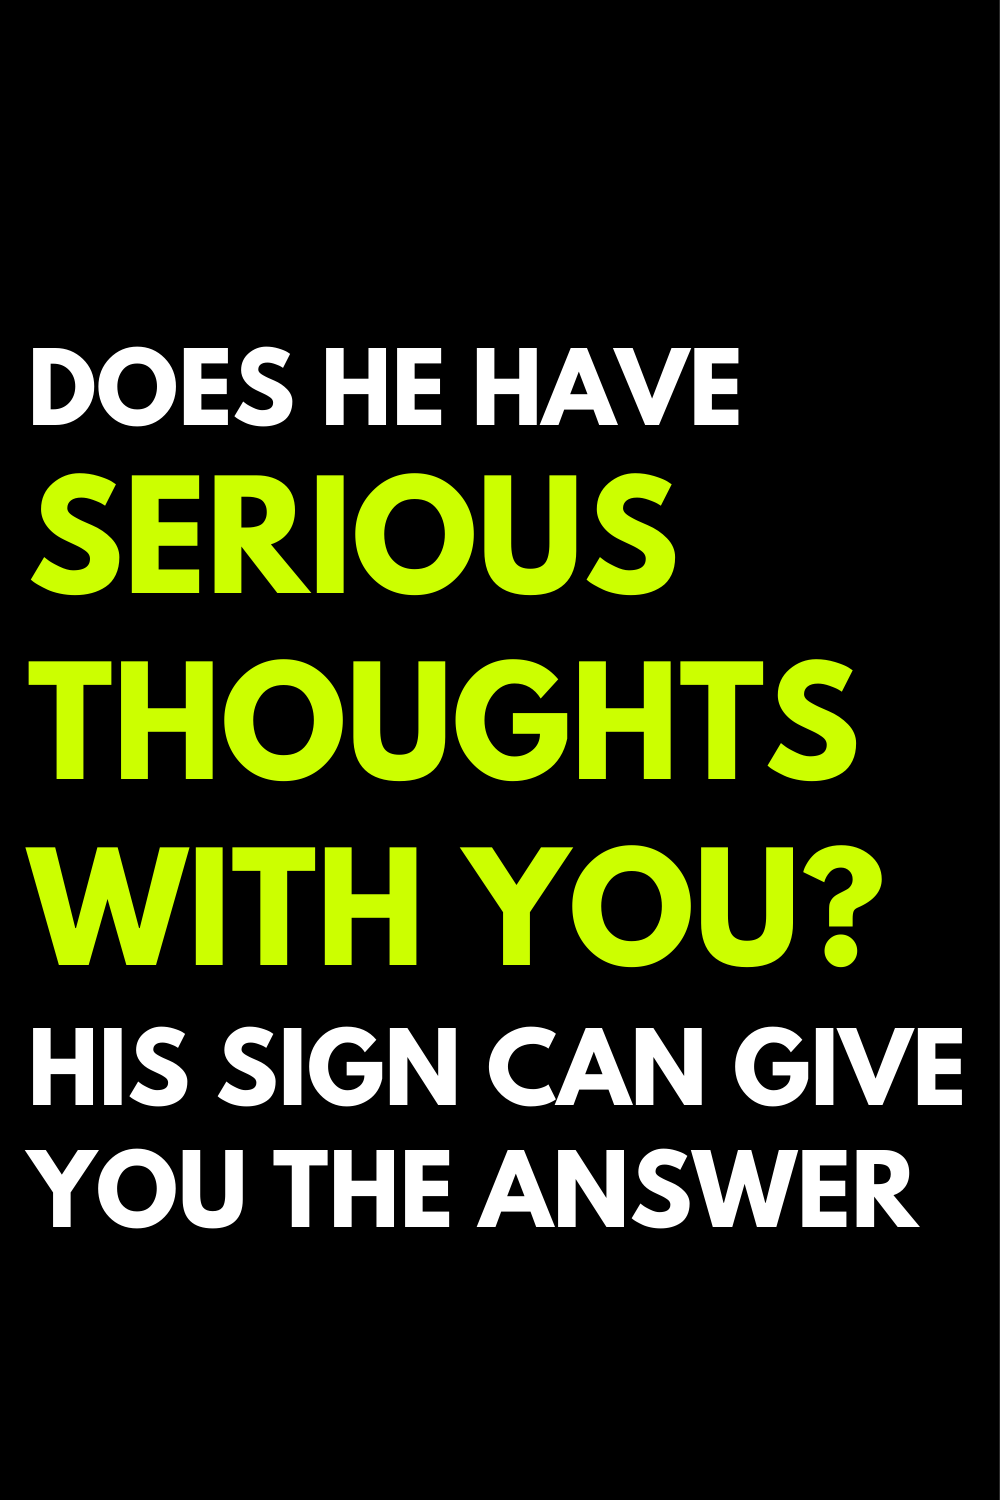 Does he have serious thoughts with you? His sign can give you the answer